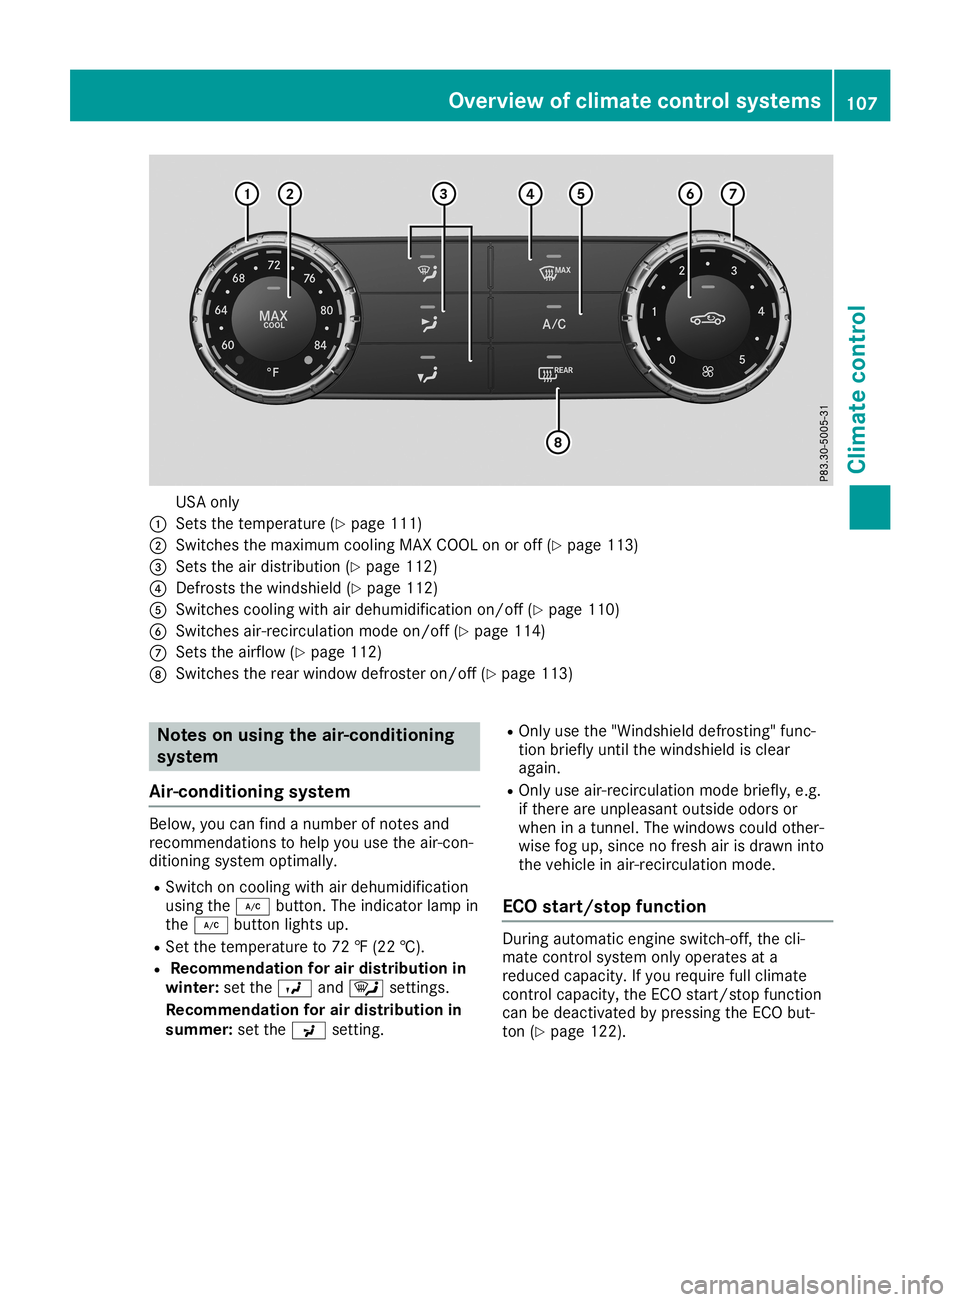 MERCEDES-BENZ SLC ROADSTER 2019  Owners Manual USA
only
0043 Sets thetemperature (Ypage 111)
0044 Switches themaximum coolingMAXCOOL onoroff (Ypage 113)
0087 Sets theairdistribution (Ypage 112)
0085 Defrosts thewindshiel d(Y page 112)
0083 Switche